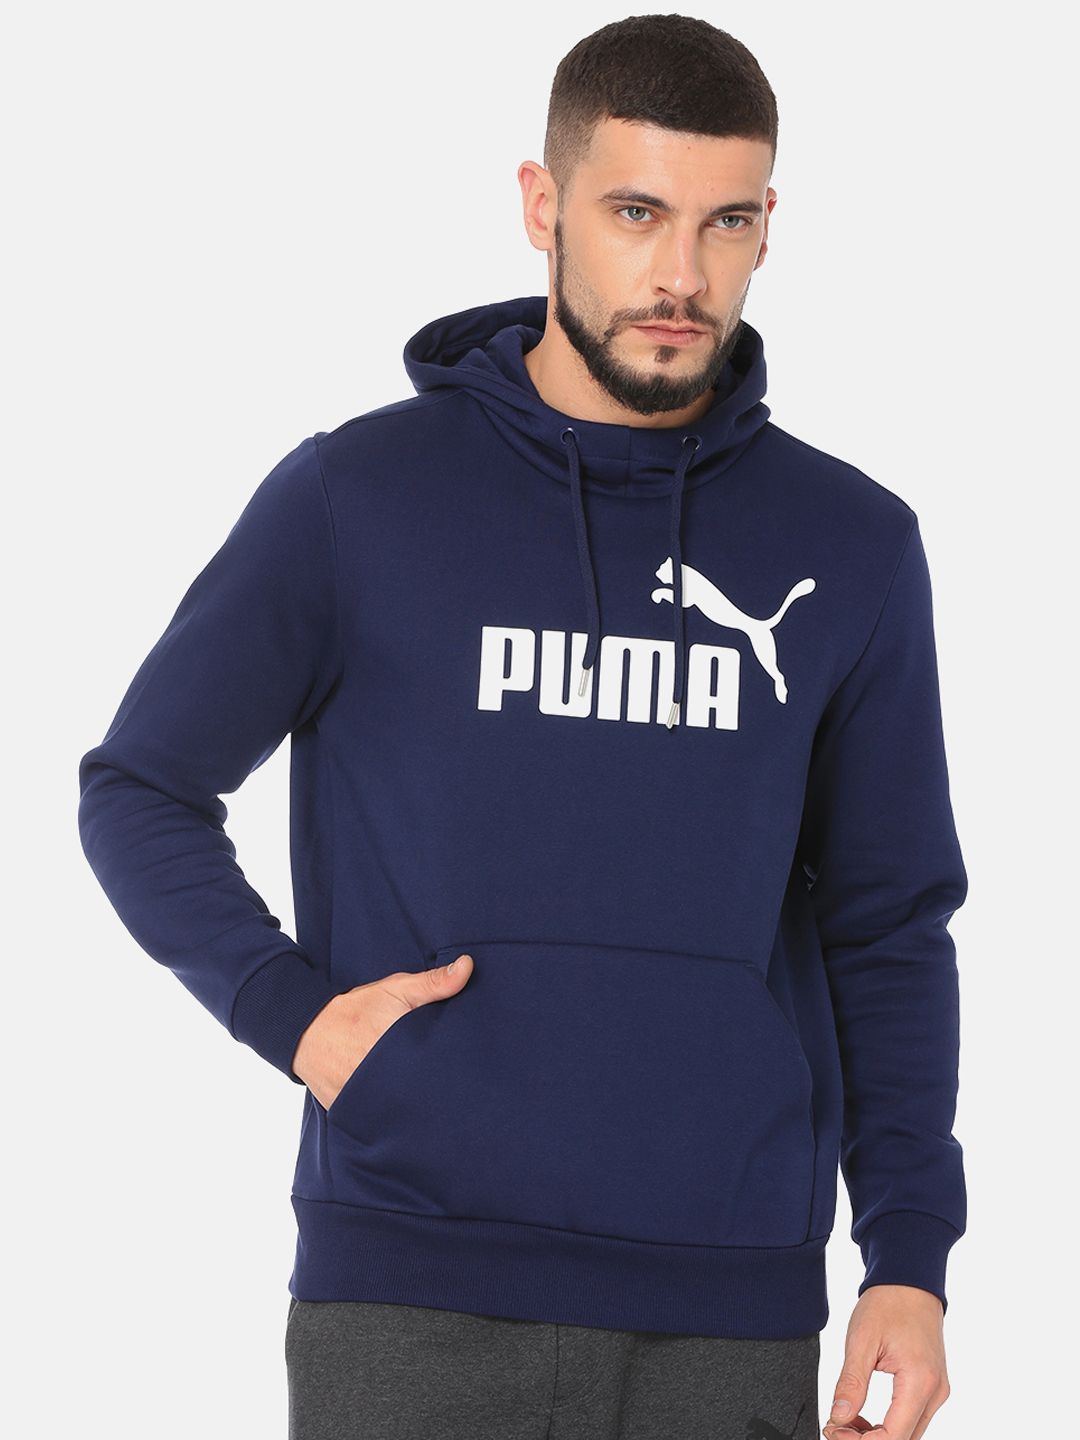 stores that sell puma